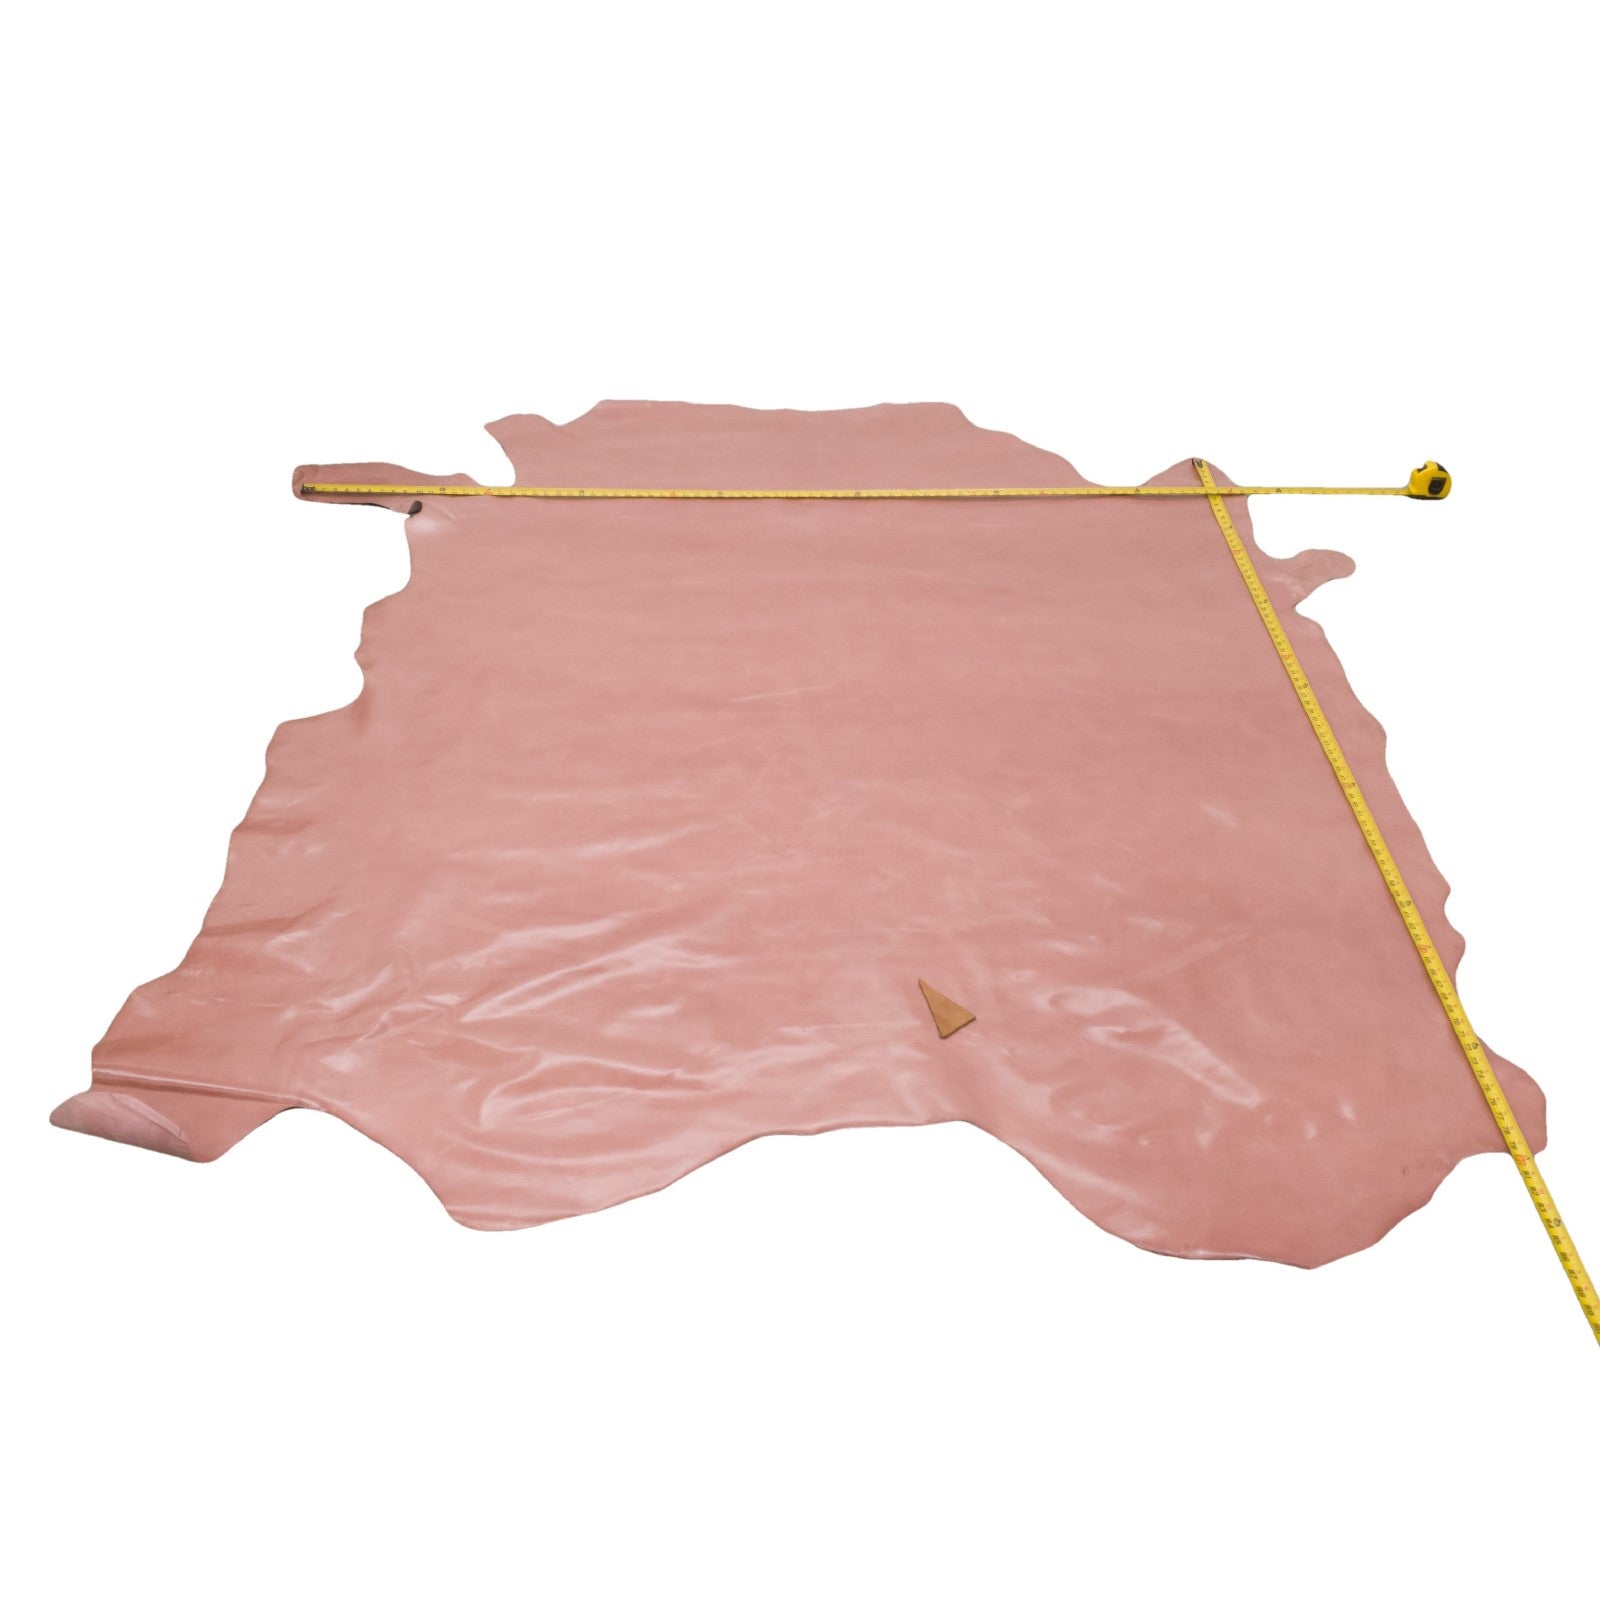 Seashell Pink, 47.1 Sq Ft, 2-3 oz, Full Upholstery Cow Hide,  | The Leather Guy